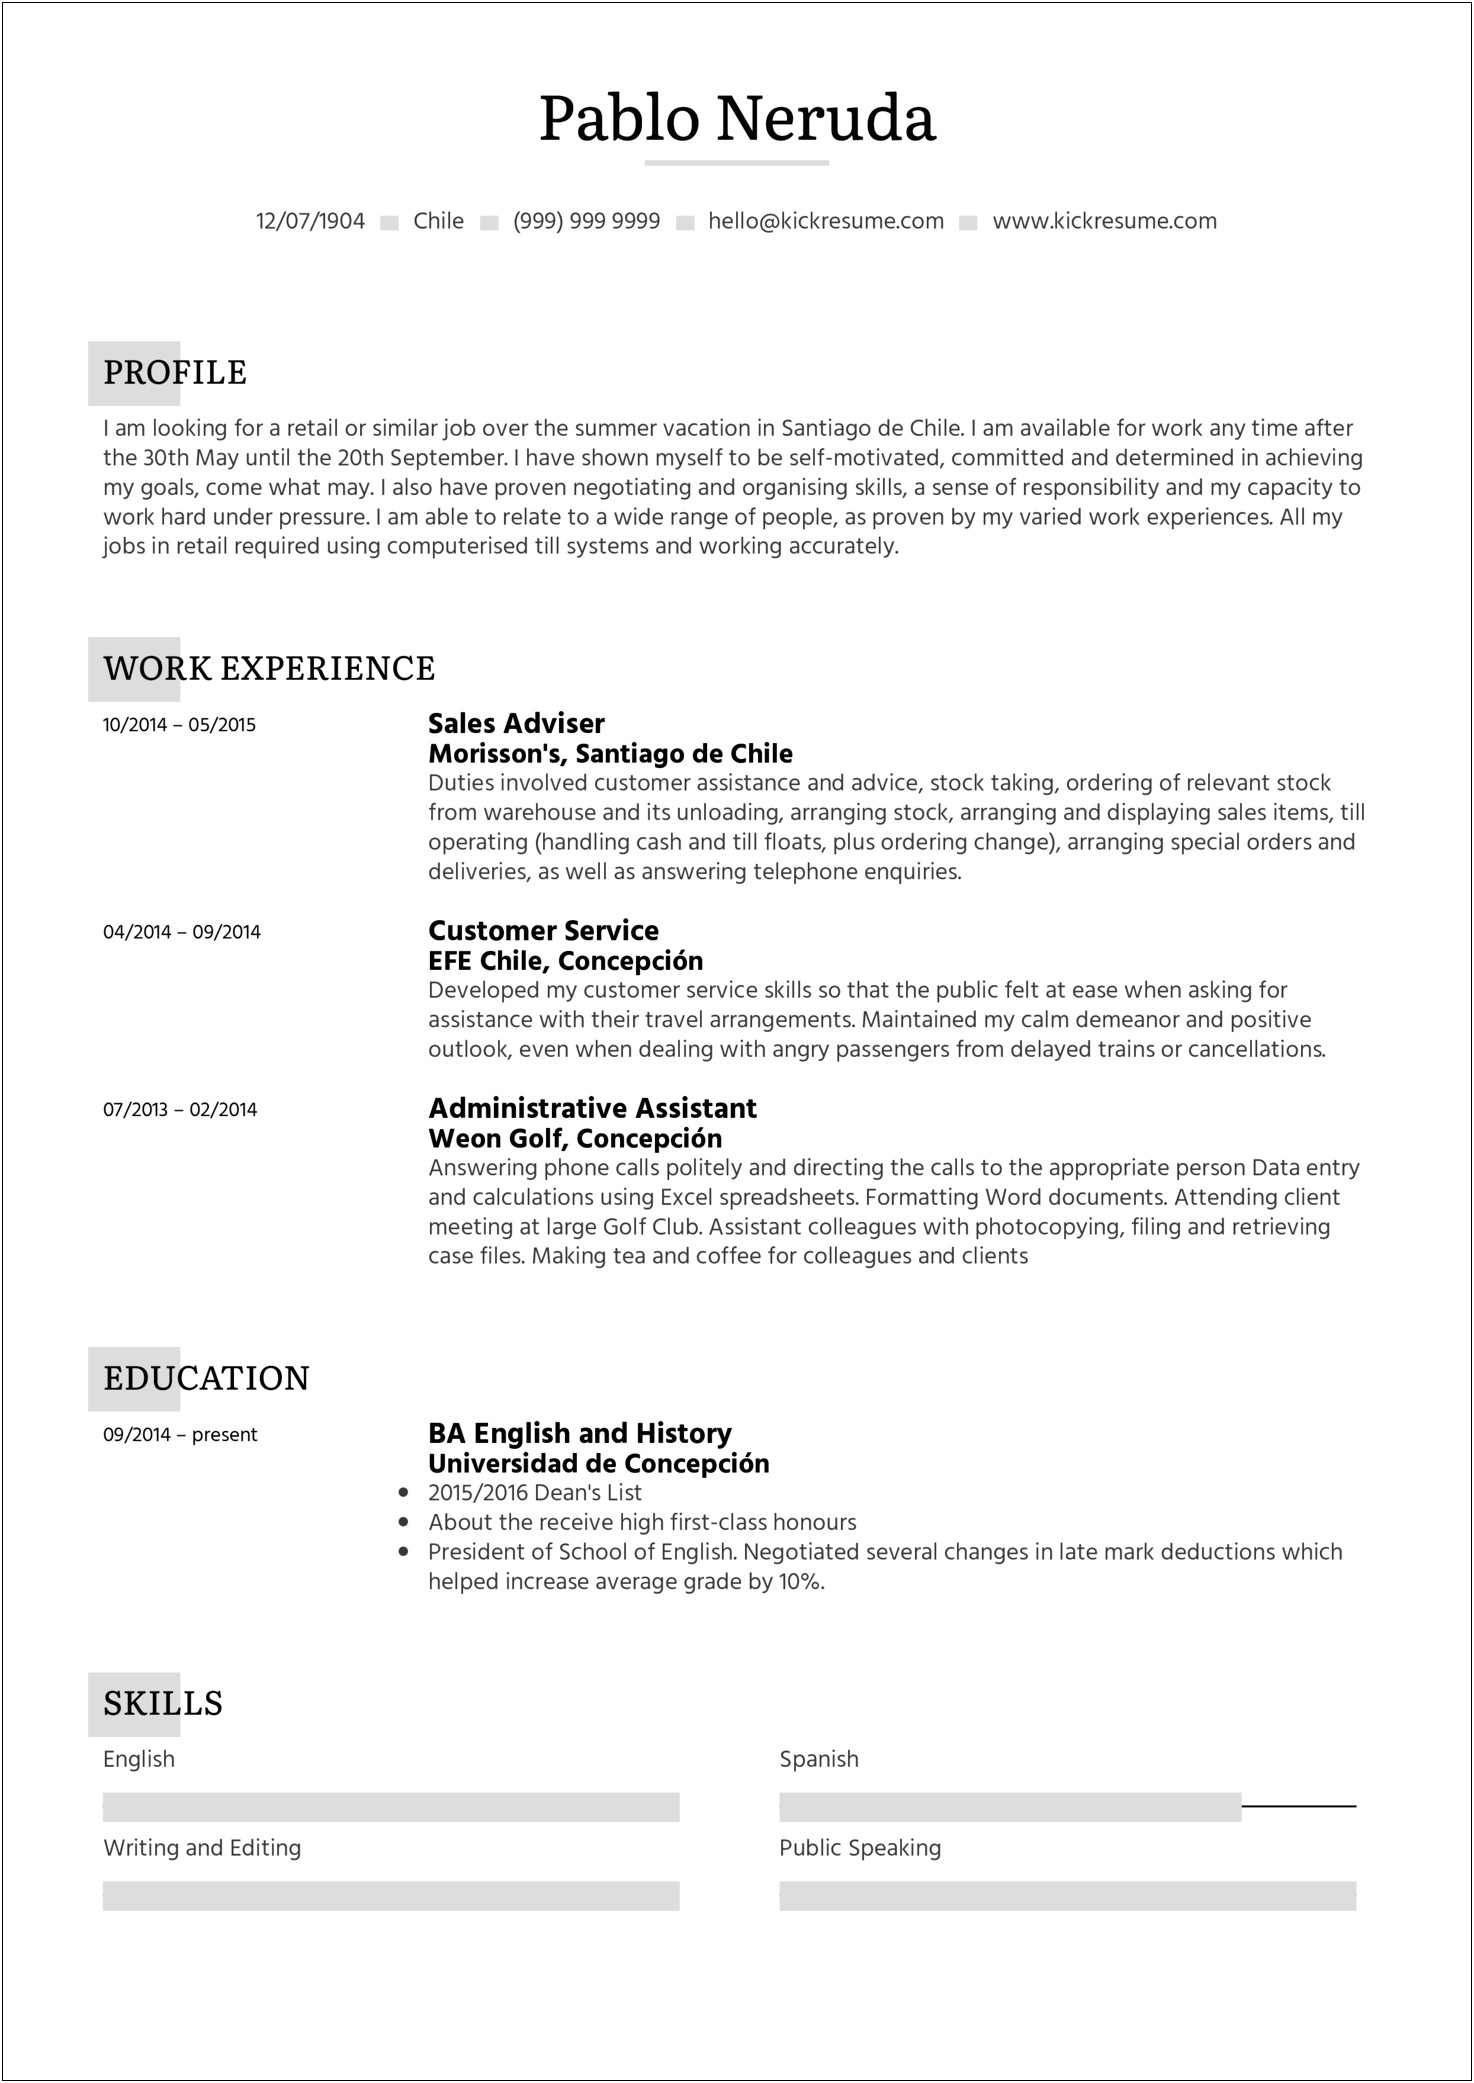 Resume Template For On Campus Job